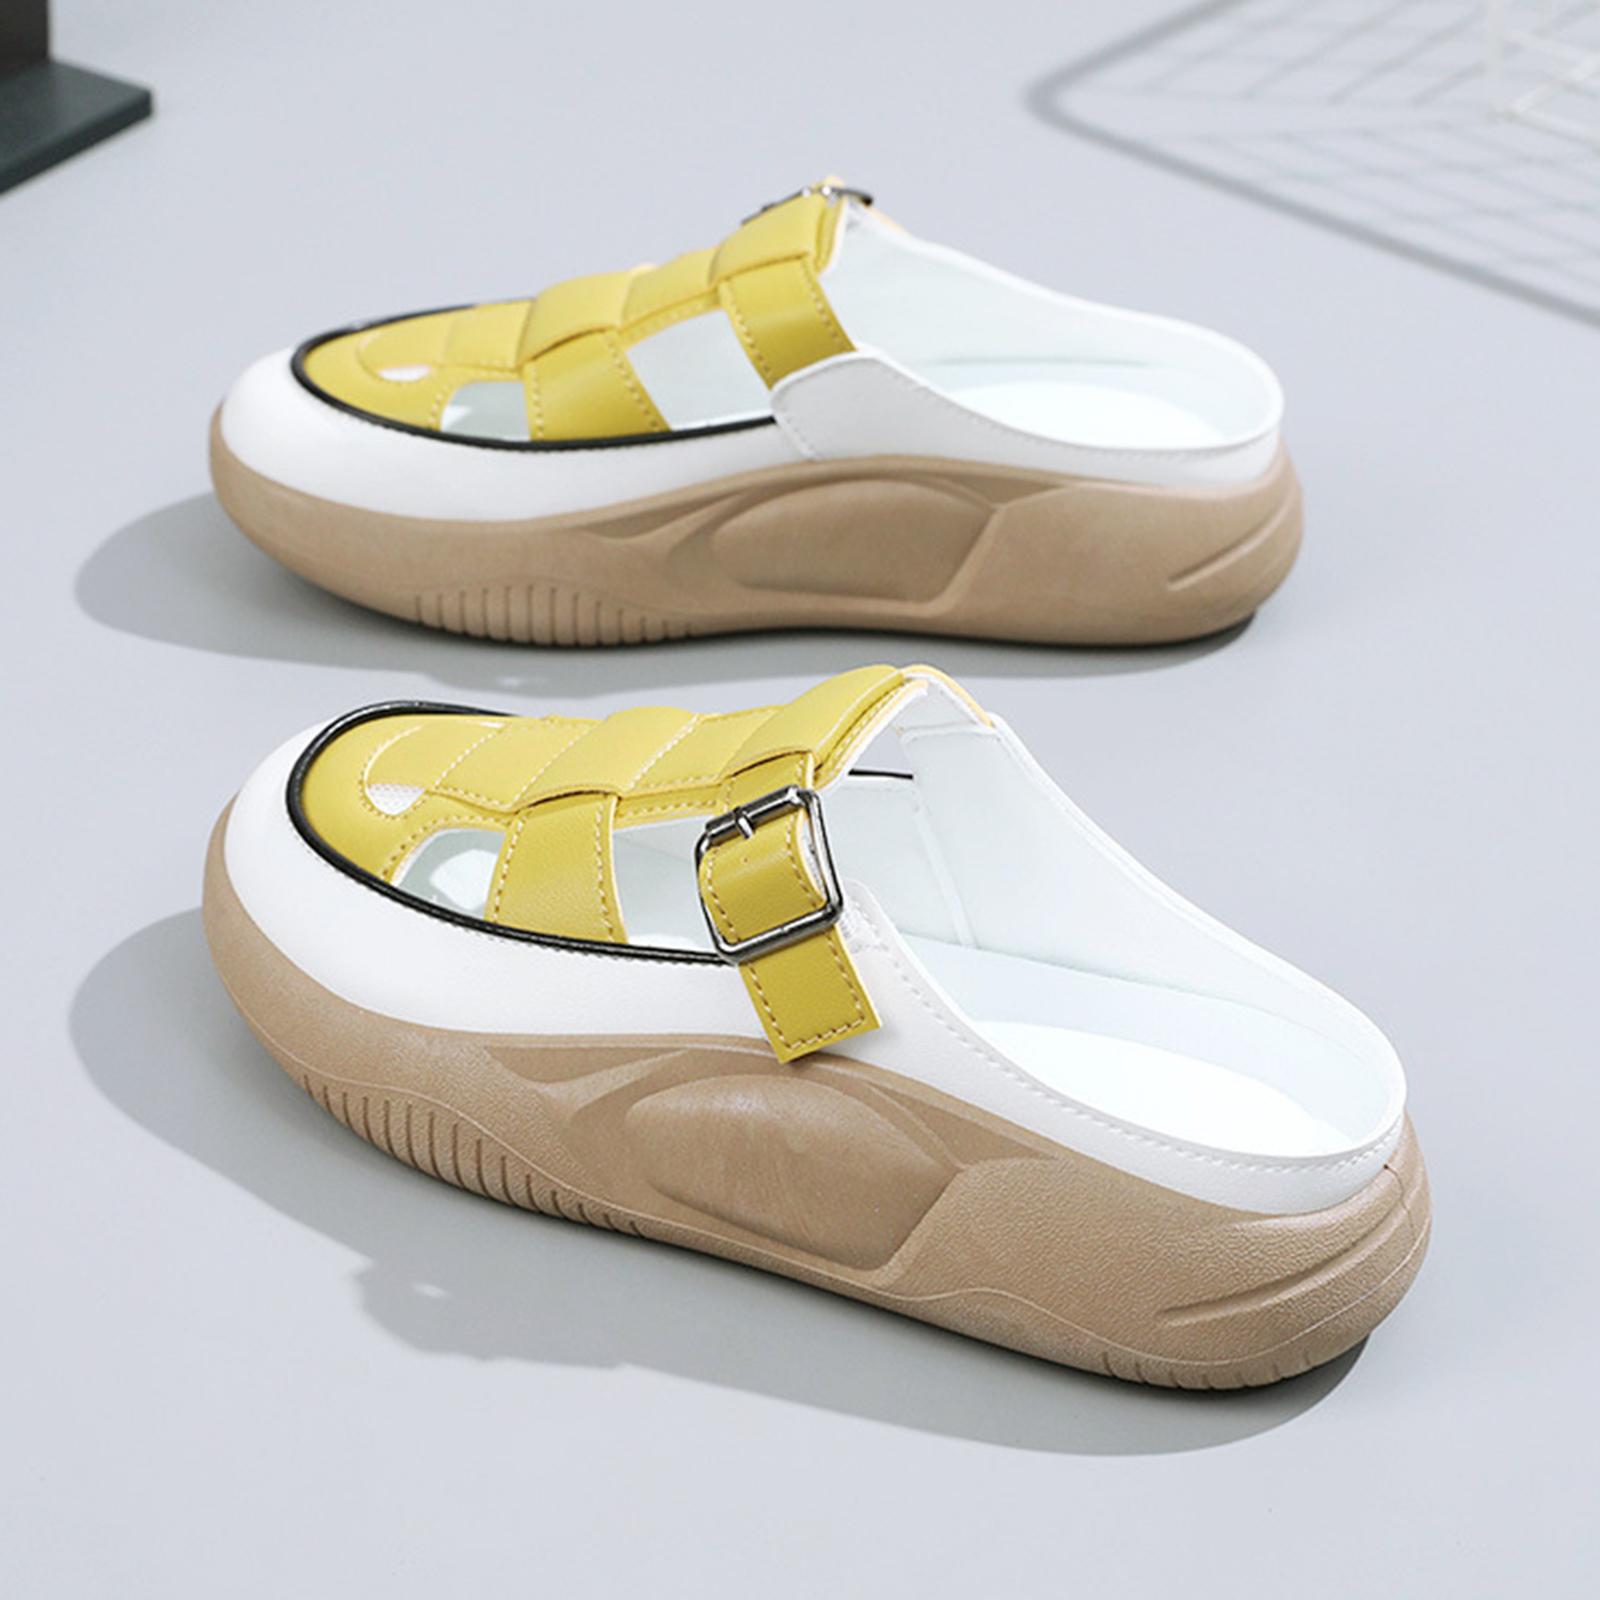 Women's Slide Sandals Comfortable Flat Shoes 5cm Thick Sole Nonslip Slippers Yellow 40